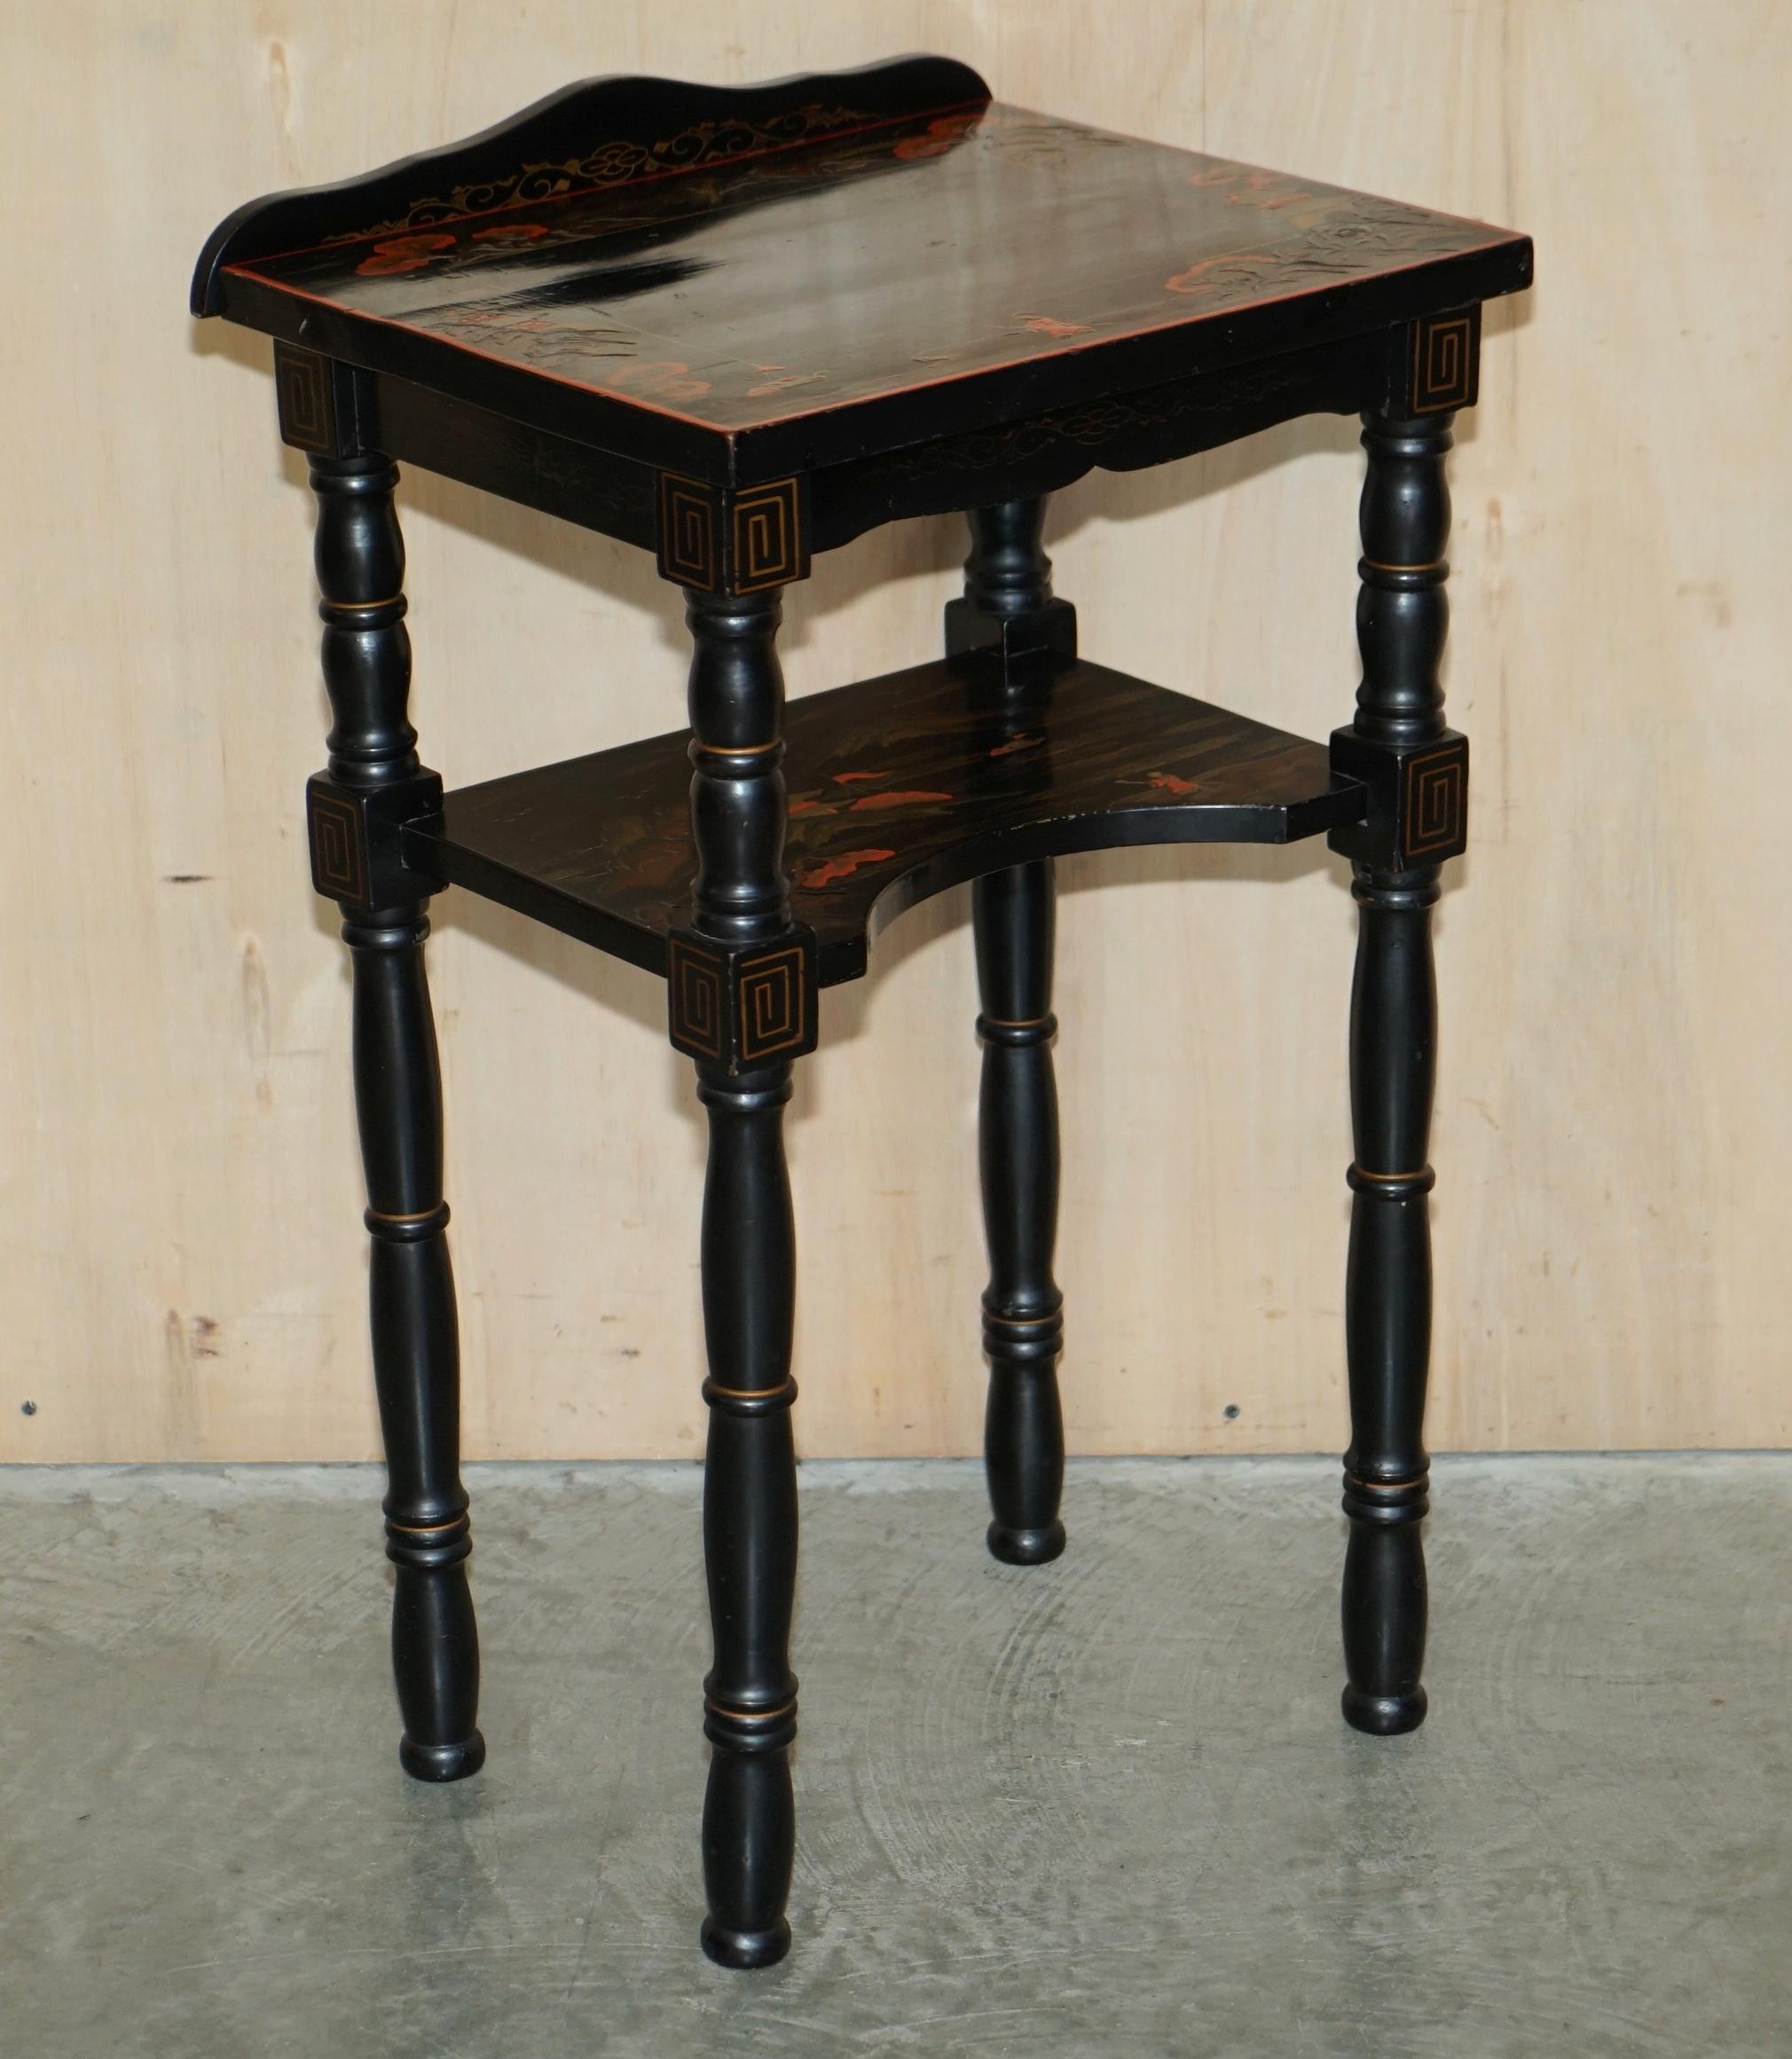 Royal House Antiques

Royal House Antiques is delighted to offer for sale this sublime nest of two original Chinese Chinoiserie black lacquered tables with pagoda temple drawings, turned legs and gold leaf detailing.

Please note the delivery fee